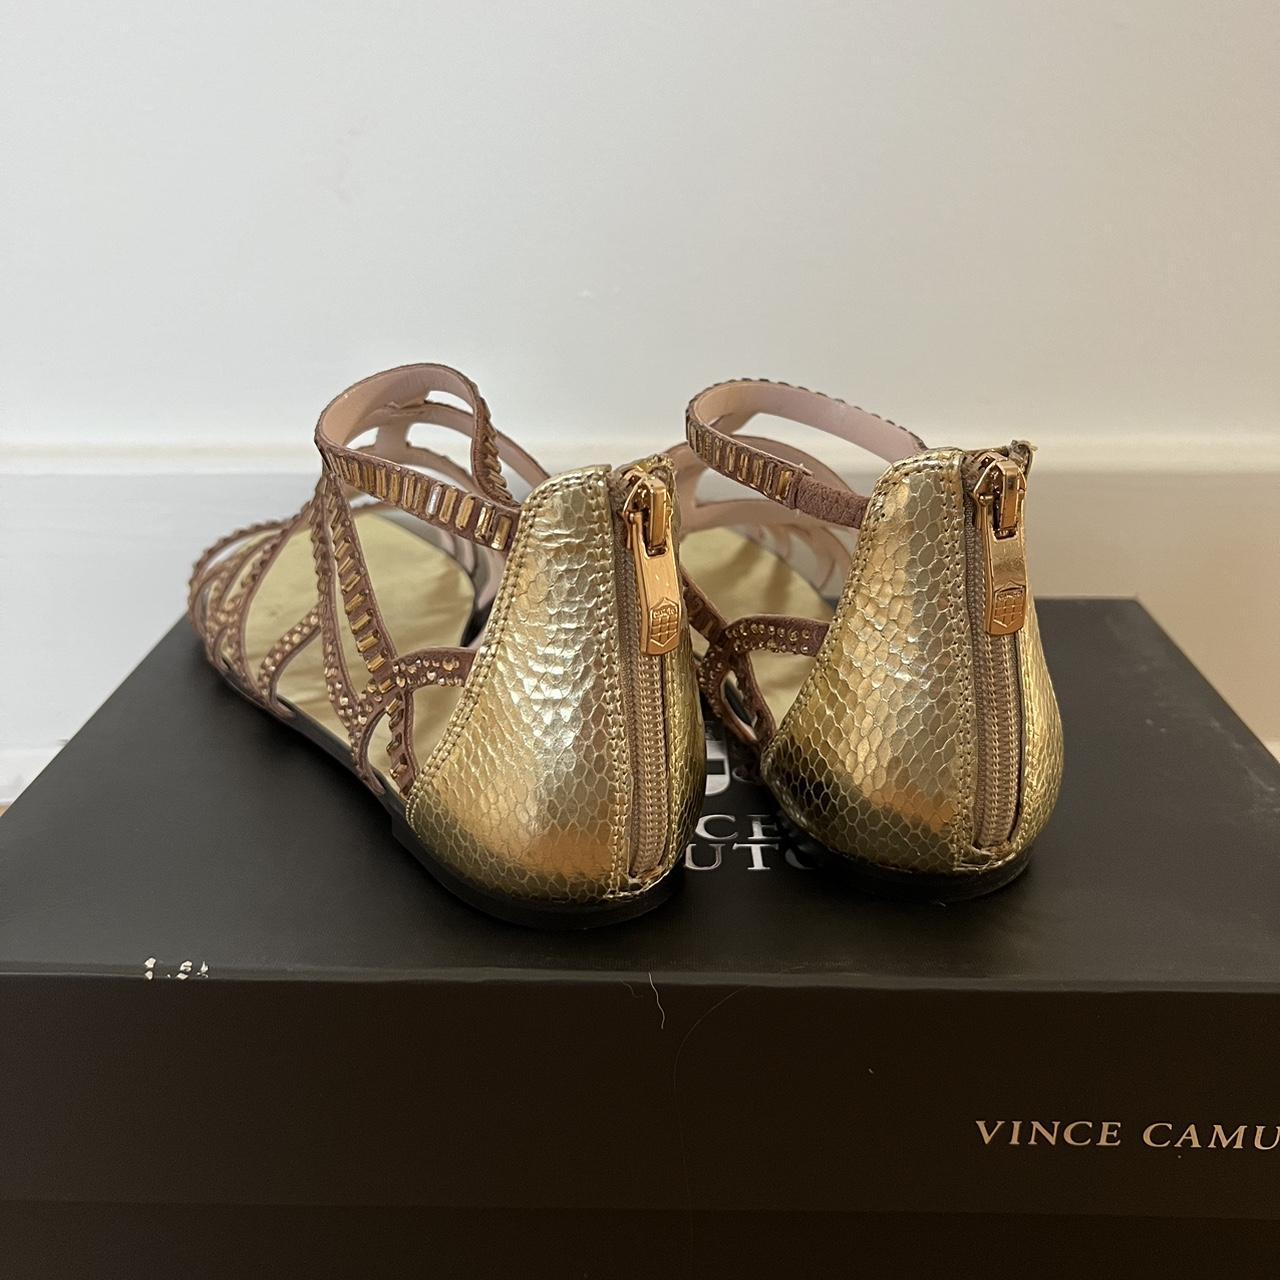 Vince Camuto Women's Tan and Gold Sandals (3)